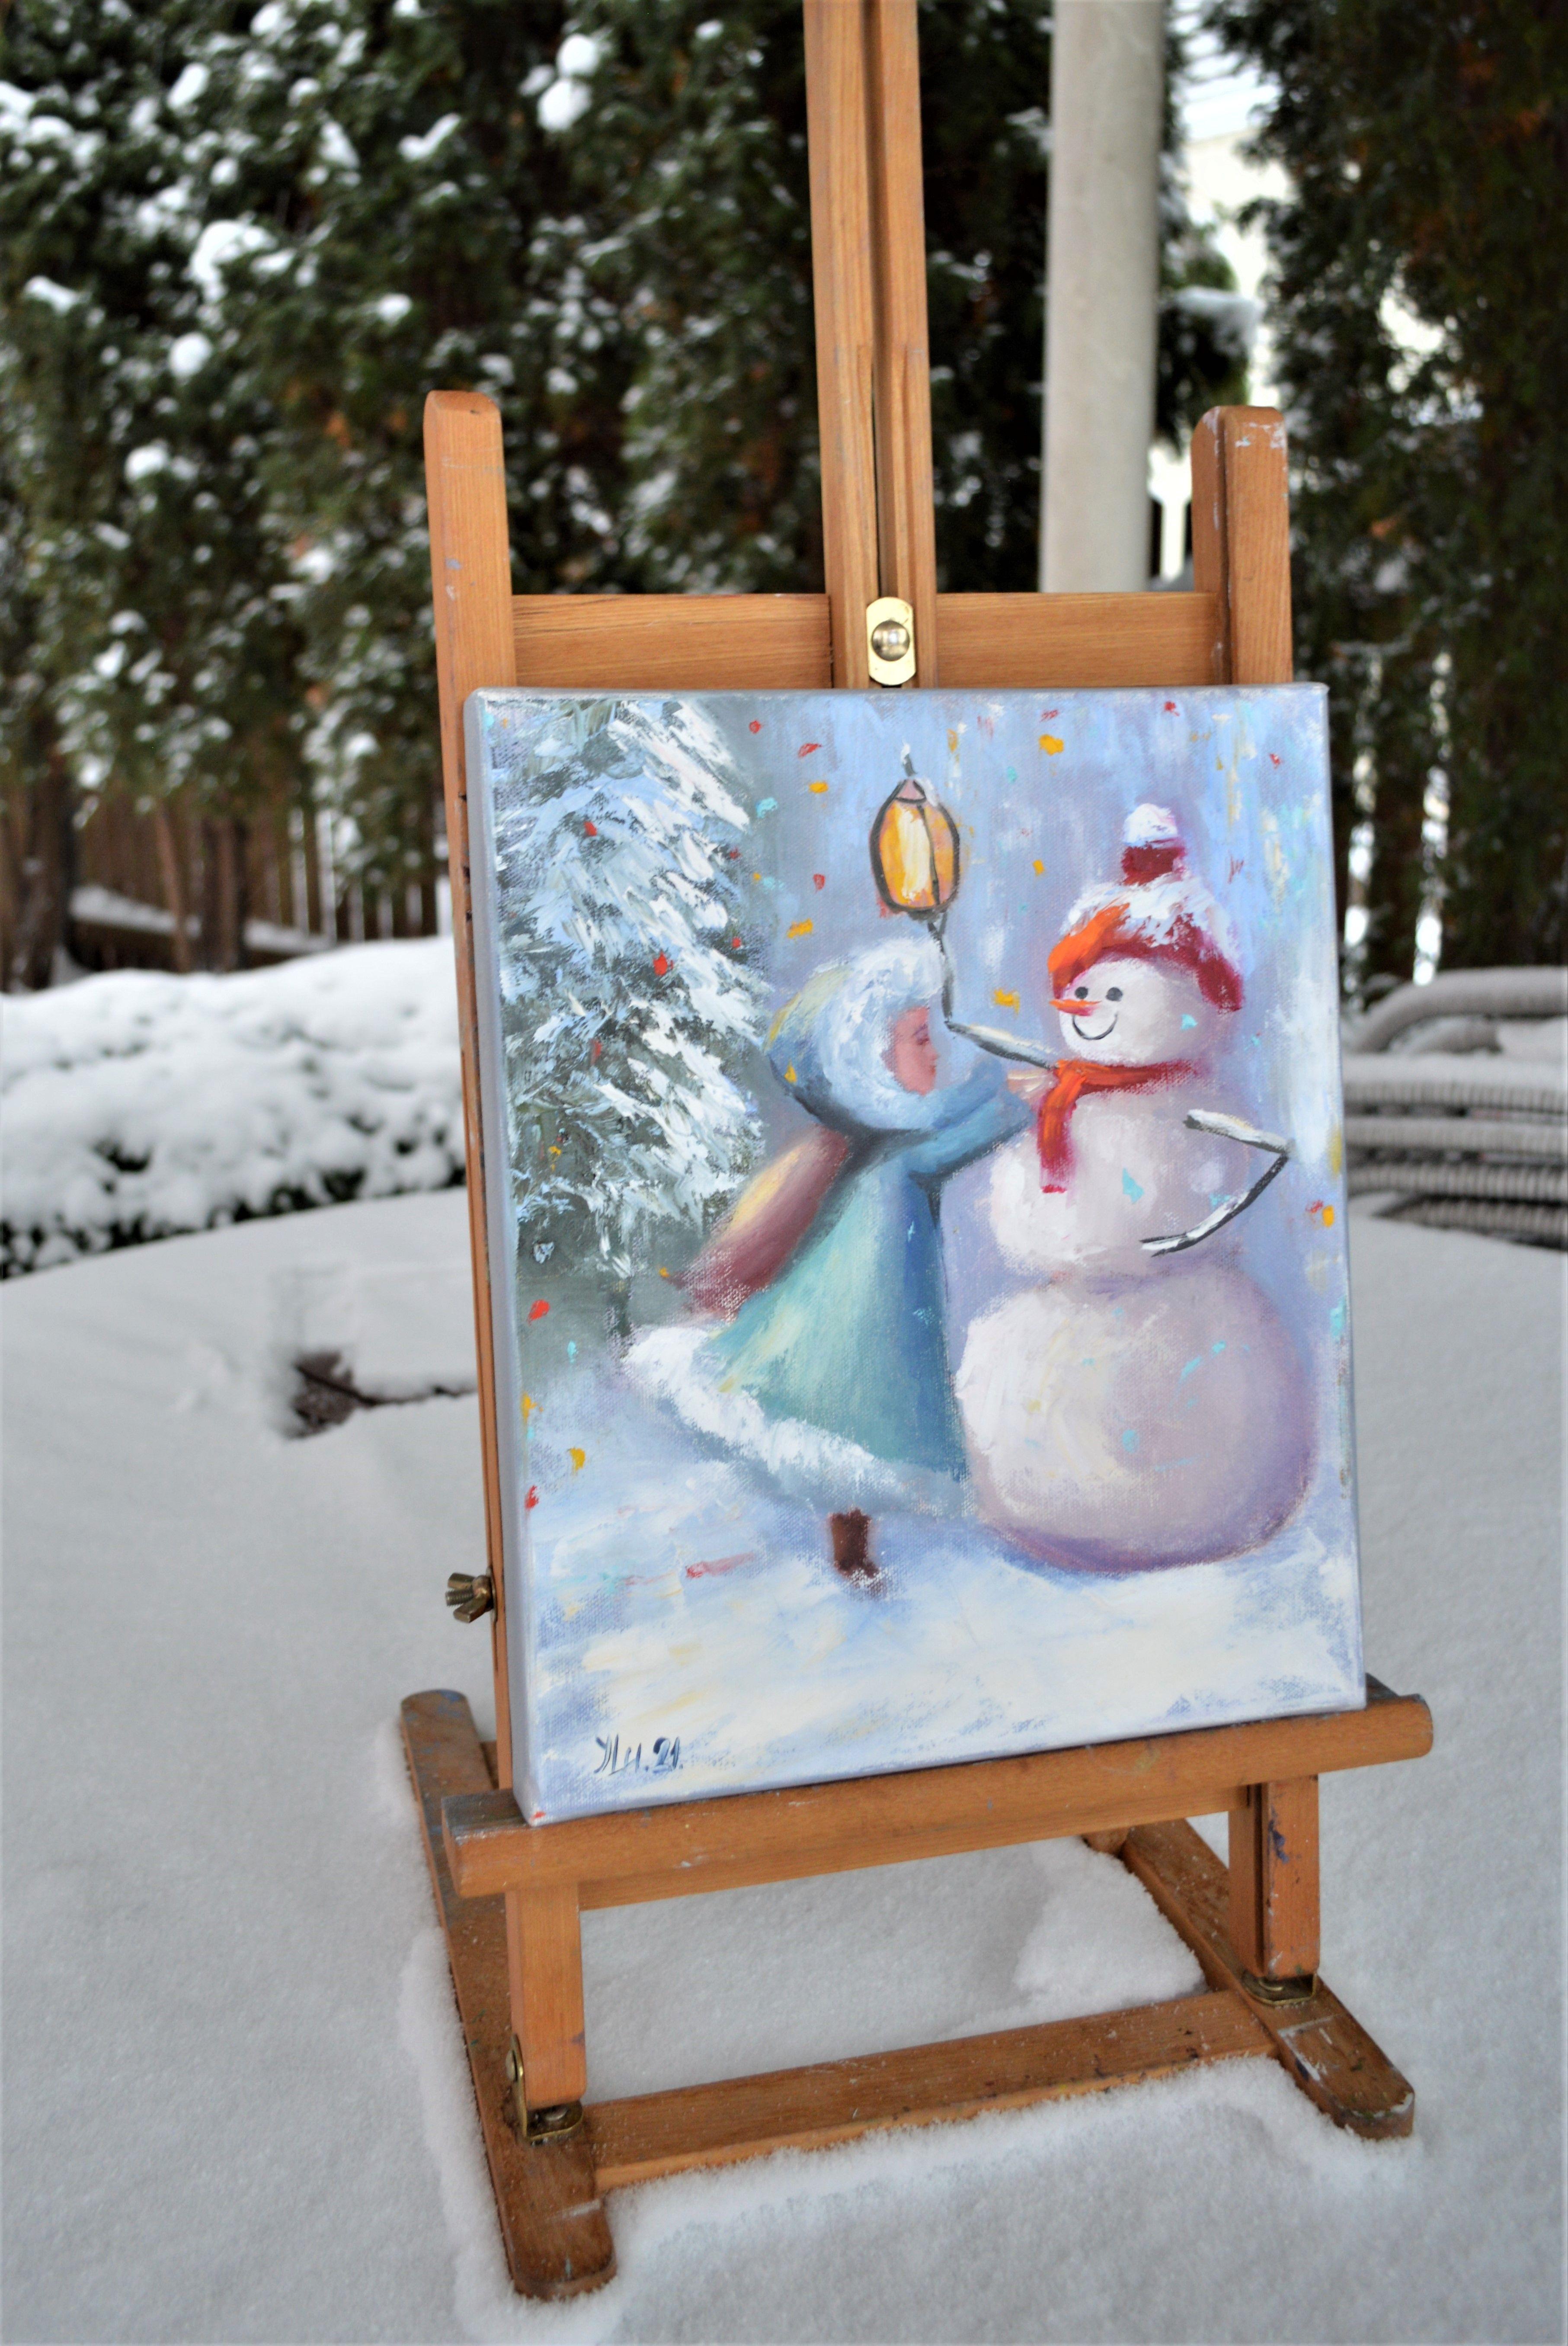 In the embrace of winter's chill, I crafted this oil painting, where vibrant touches of expressionism meet the tender narrative of impressionism. A child's innocent connection with a snowman captures the joyous spirit of the season, evoking warmth